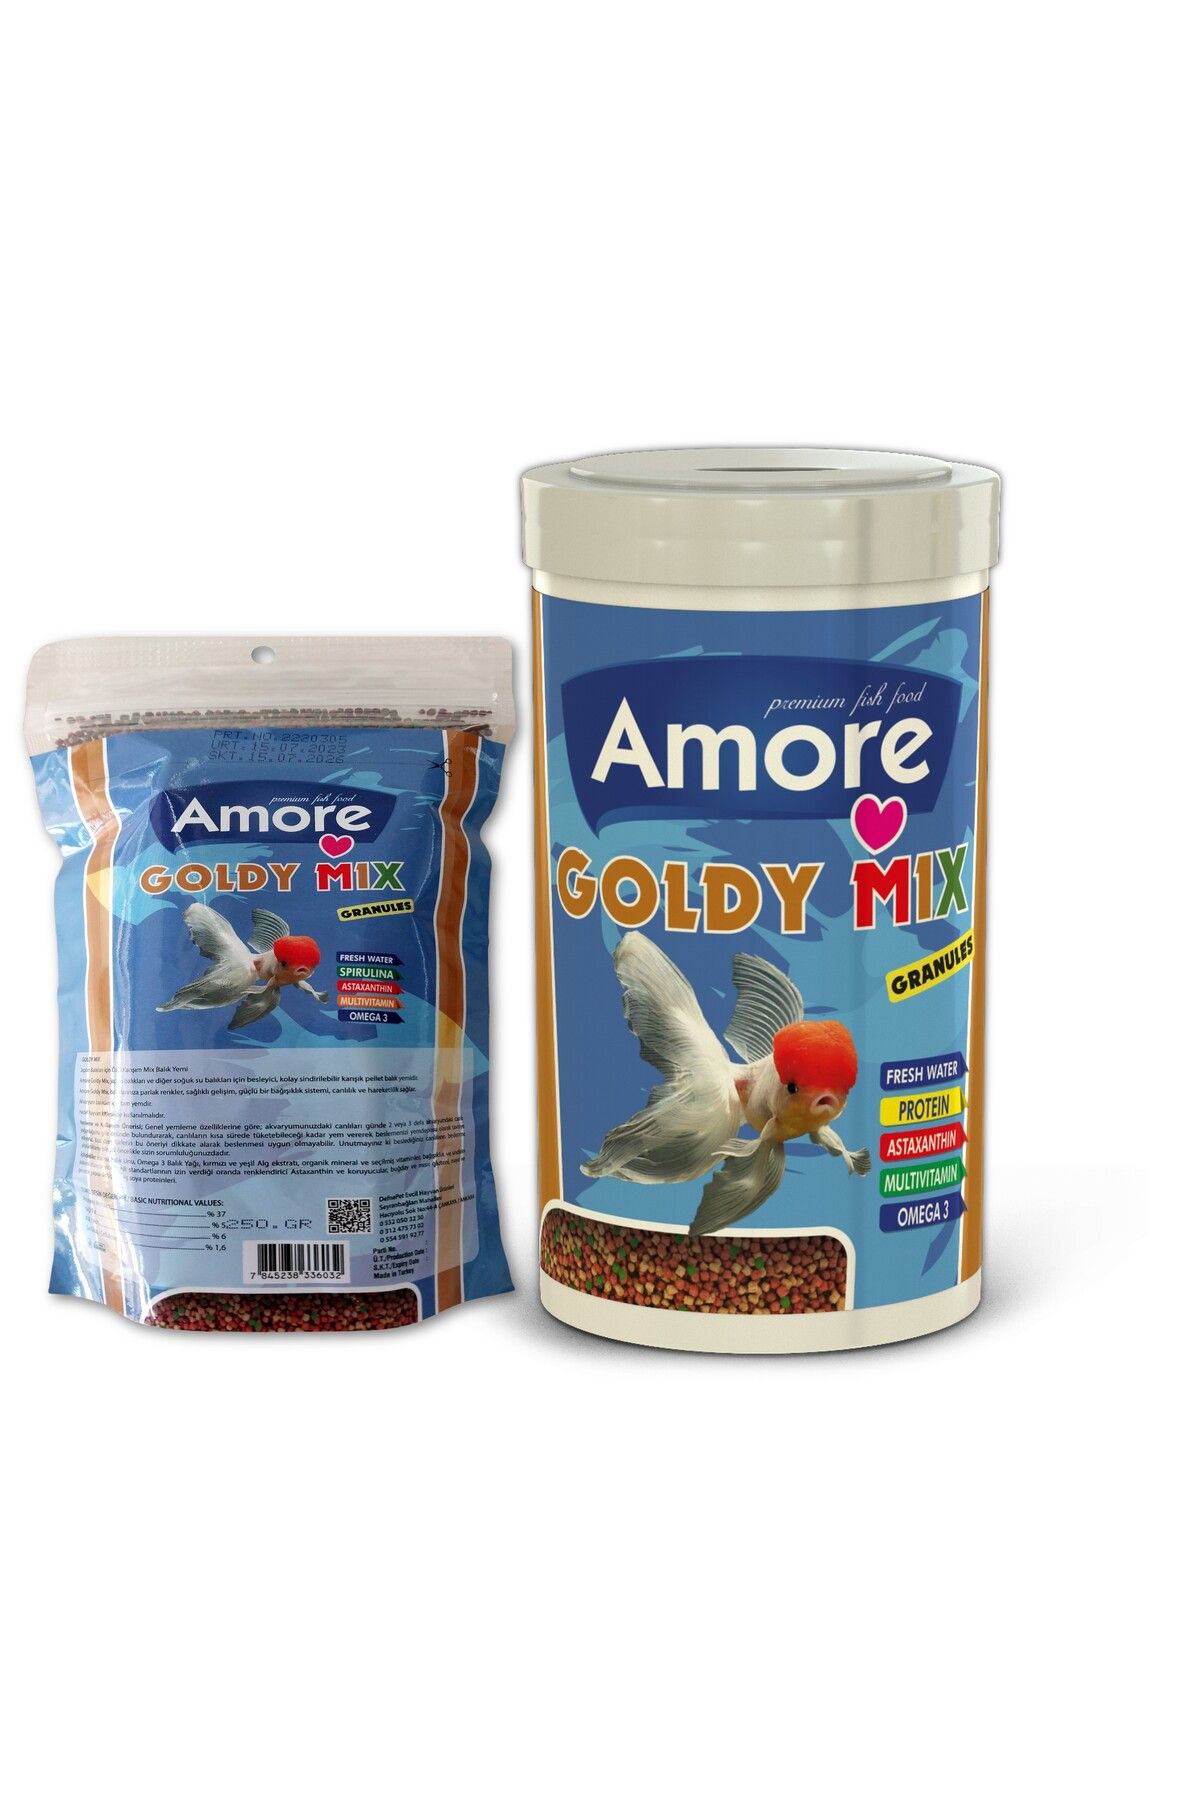 Amore Goldy Mix %37 Protein 250 Gr Easy-fill-pack Ve 1000 Ml Box Granul Japon Balik Yemi